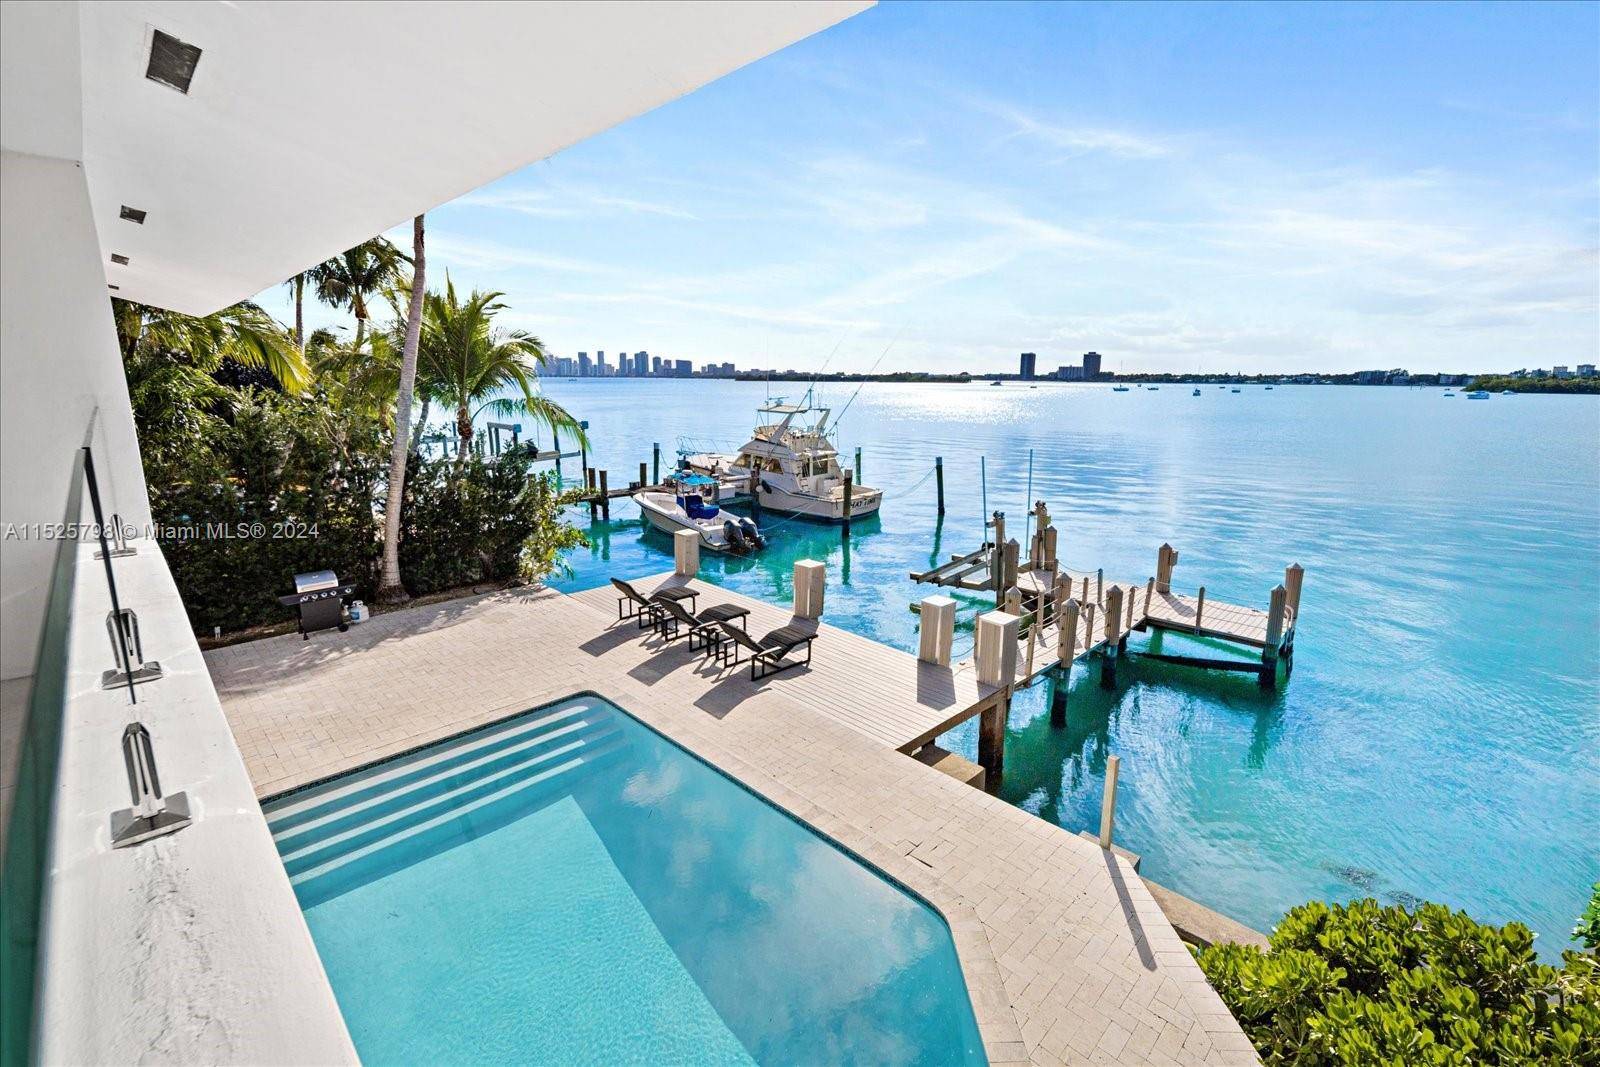 This stunning waterfront estate offers sweeping open bay views, located in the gated community of North Bay Island.